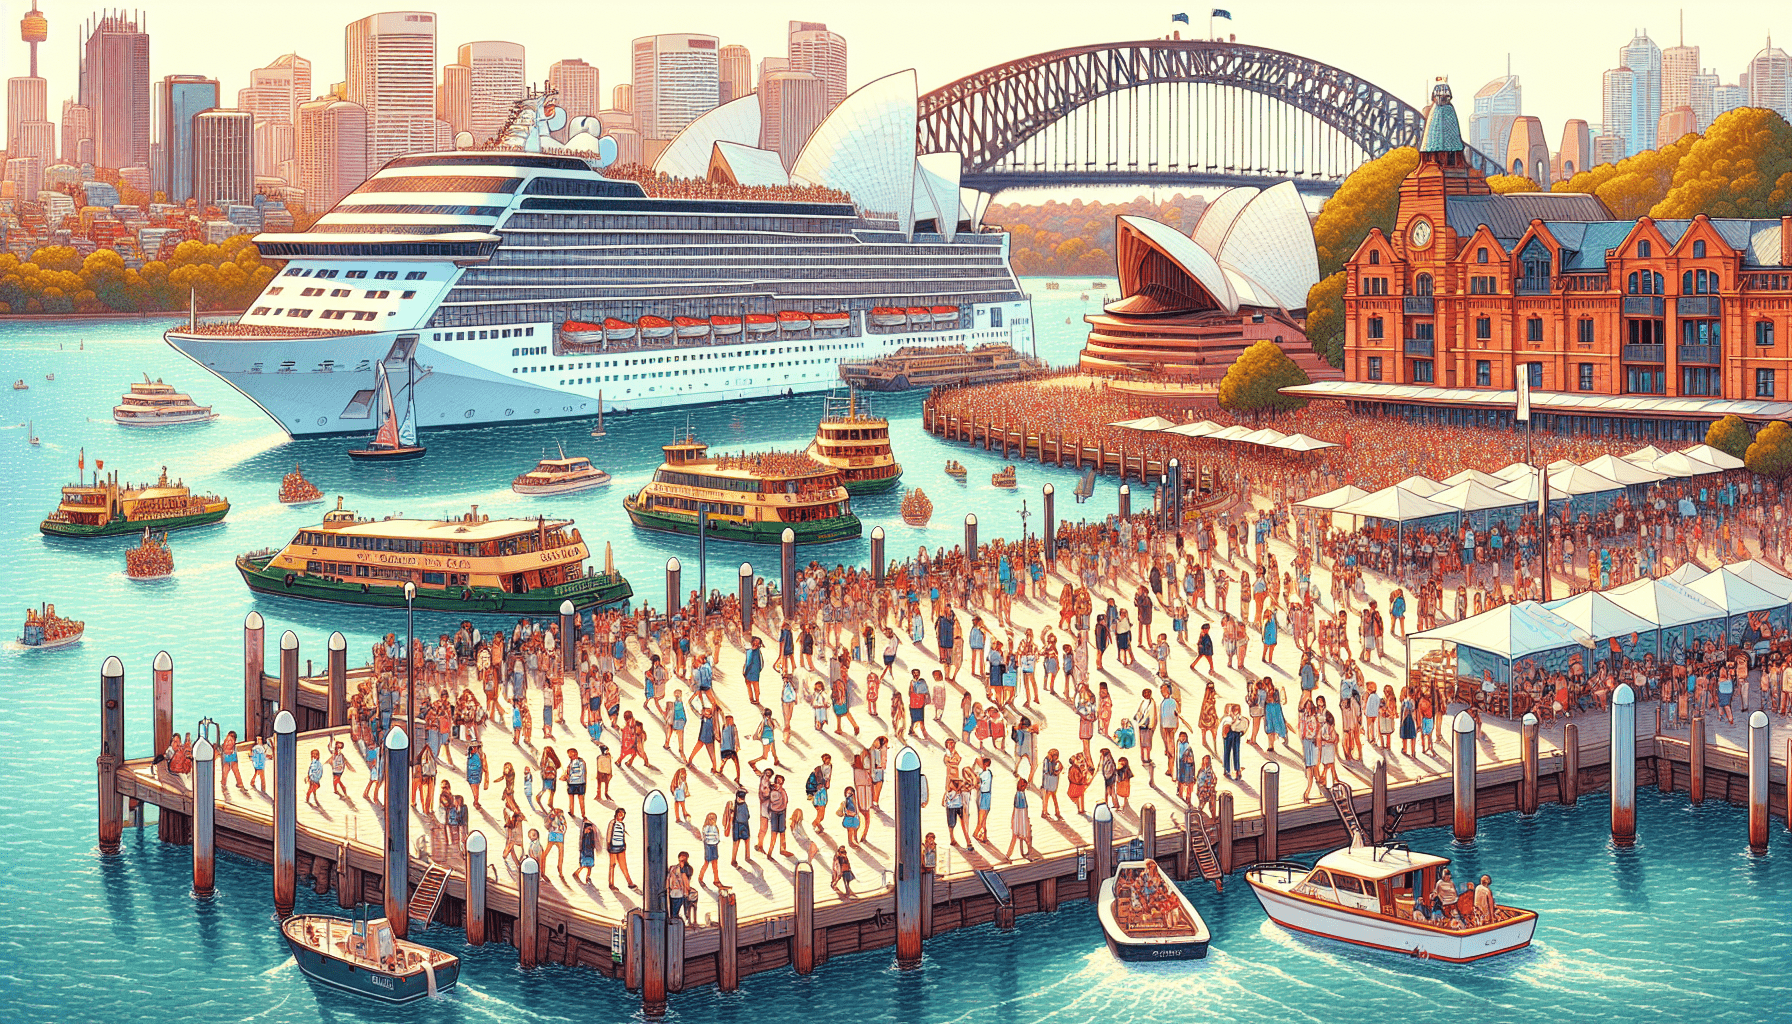 5 Things To Do On Port Day In Sydney